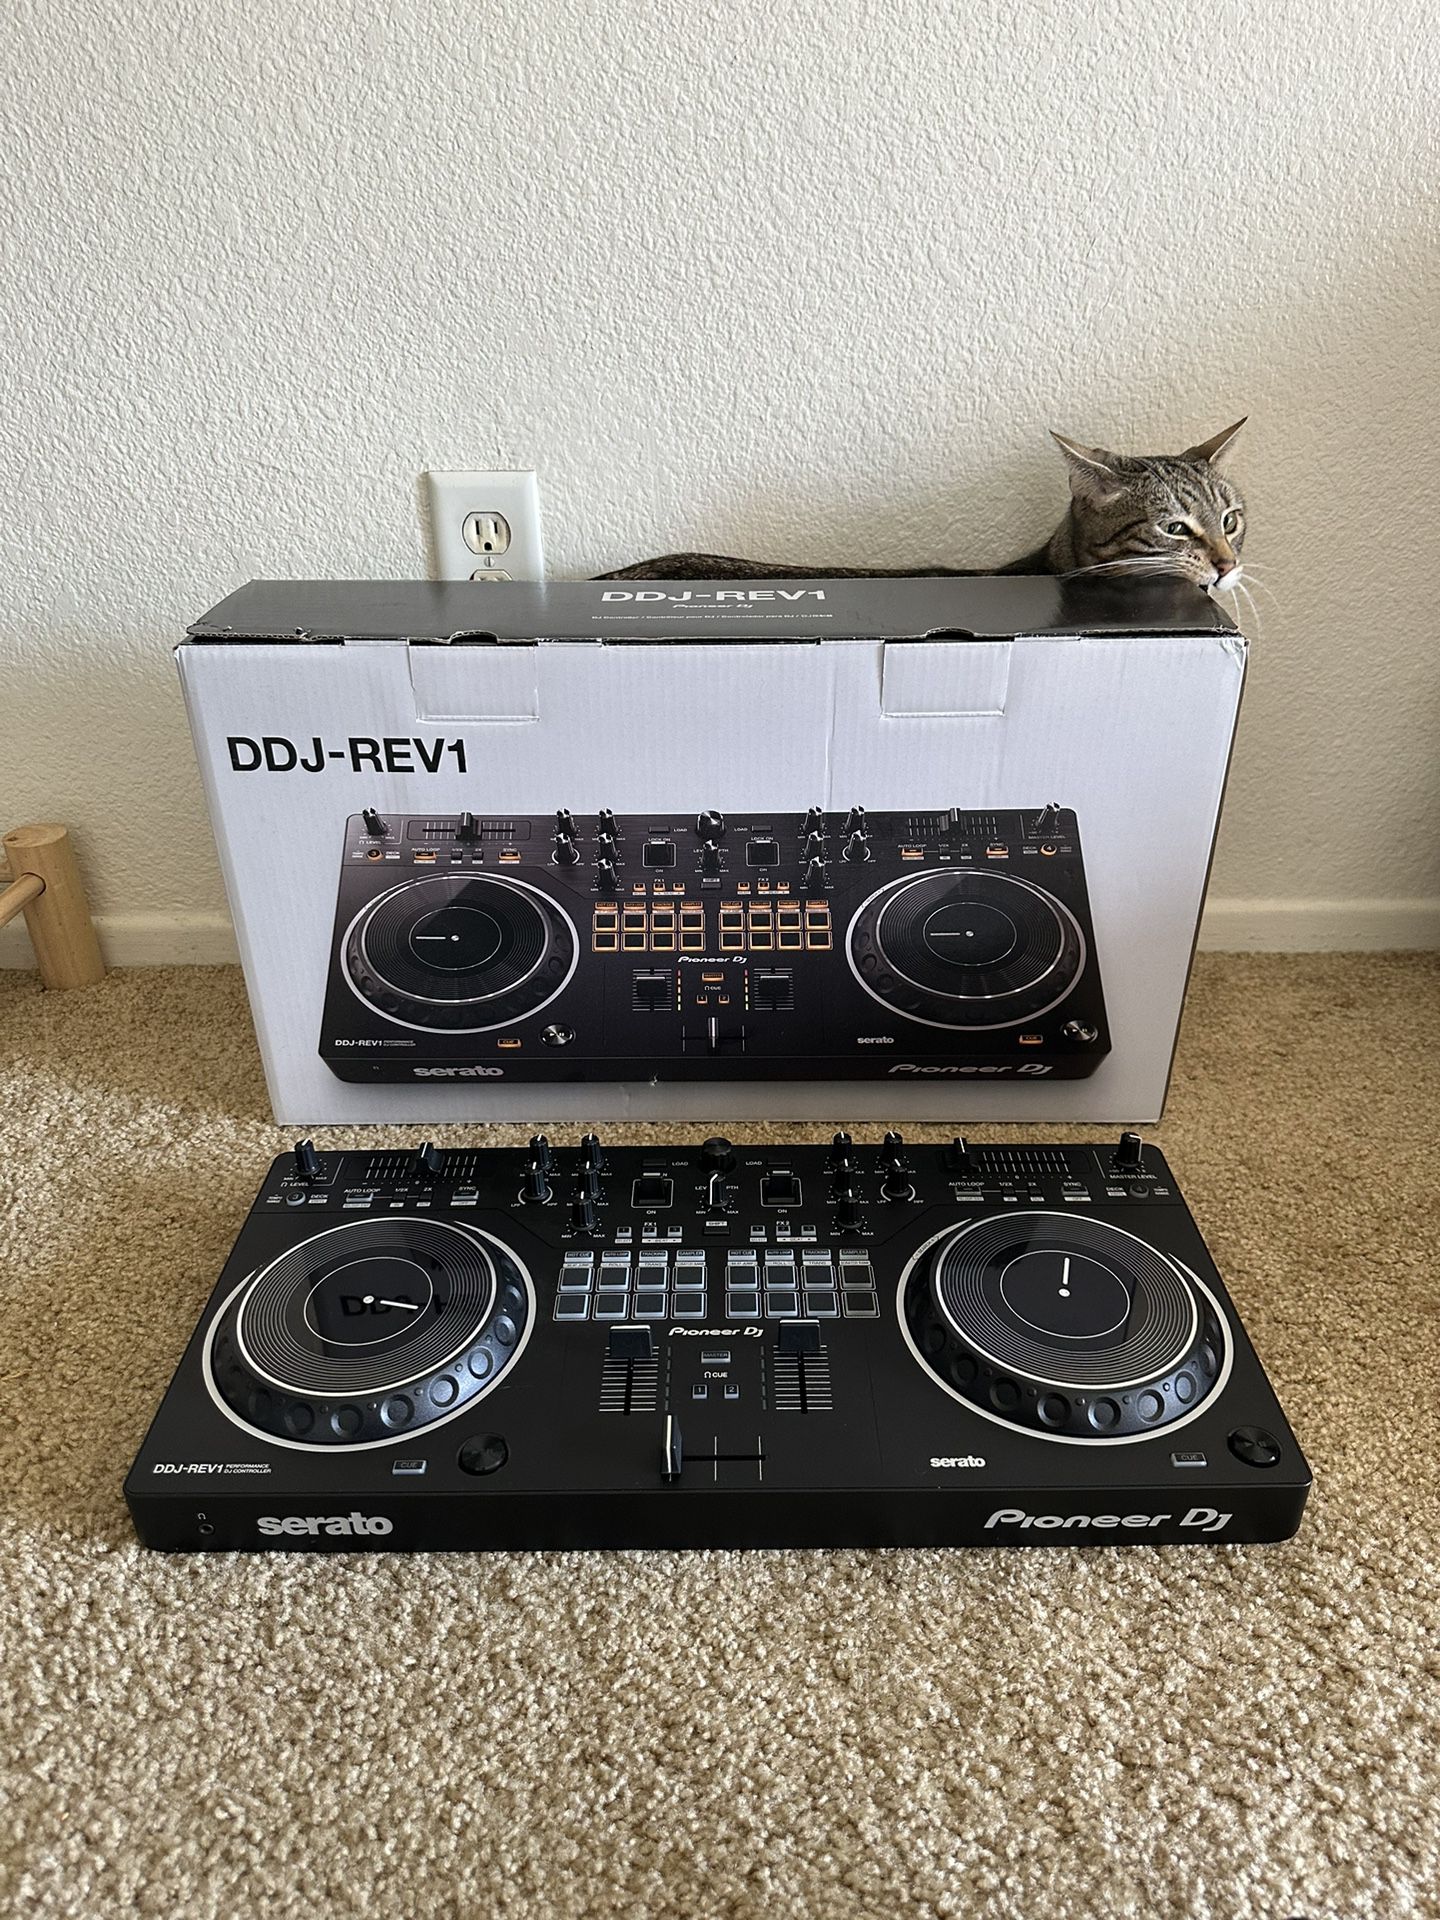 DDJ-REV1 (BRAND NEW) Open Box — Cables & Manual Included